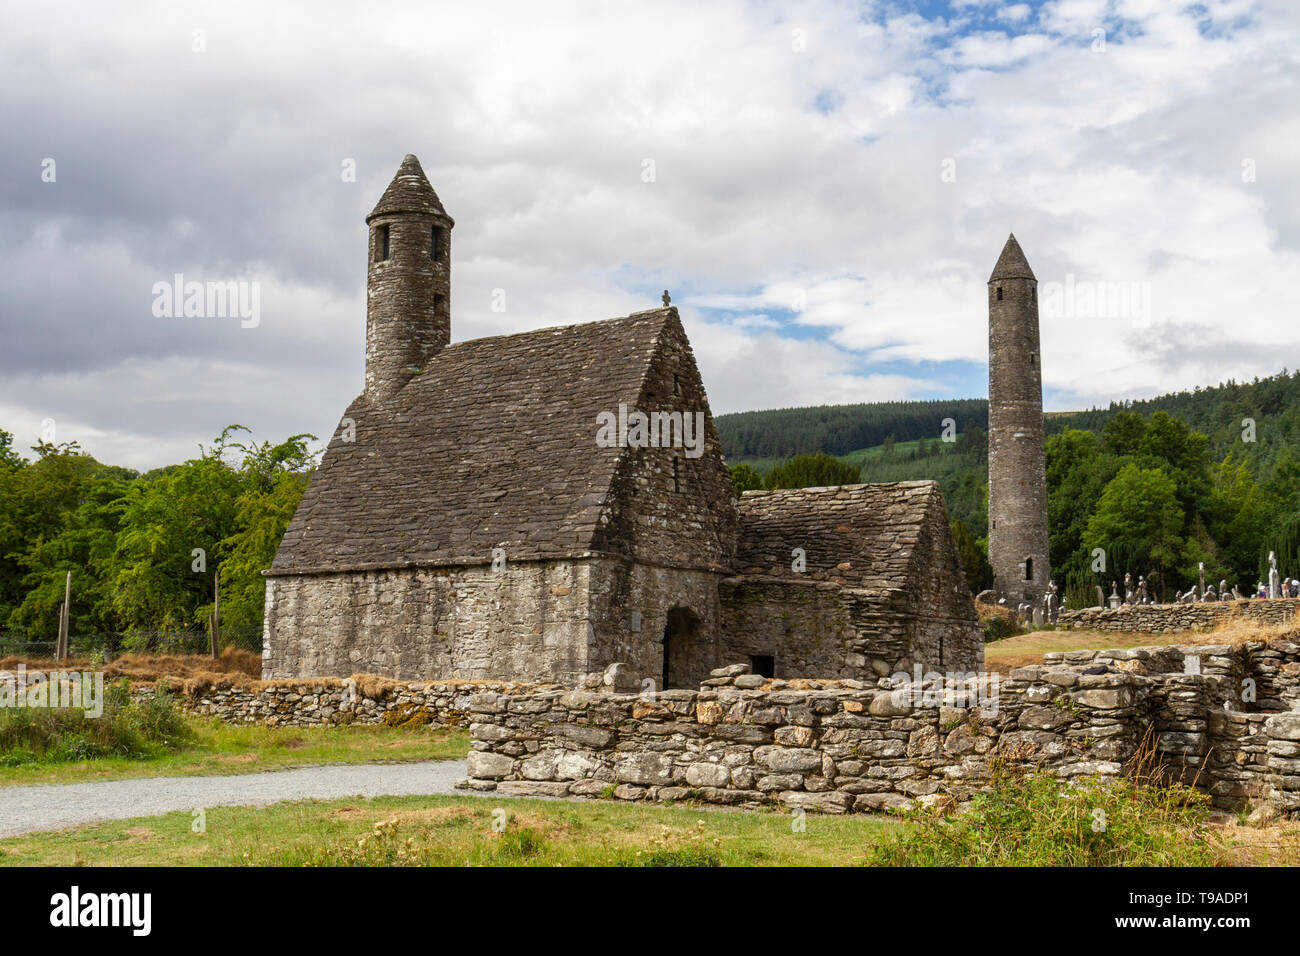 St. Kevin's church with the Glendalough Roundtower in Glendalough, County Wicklow, Ireland. Stock Photo